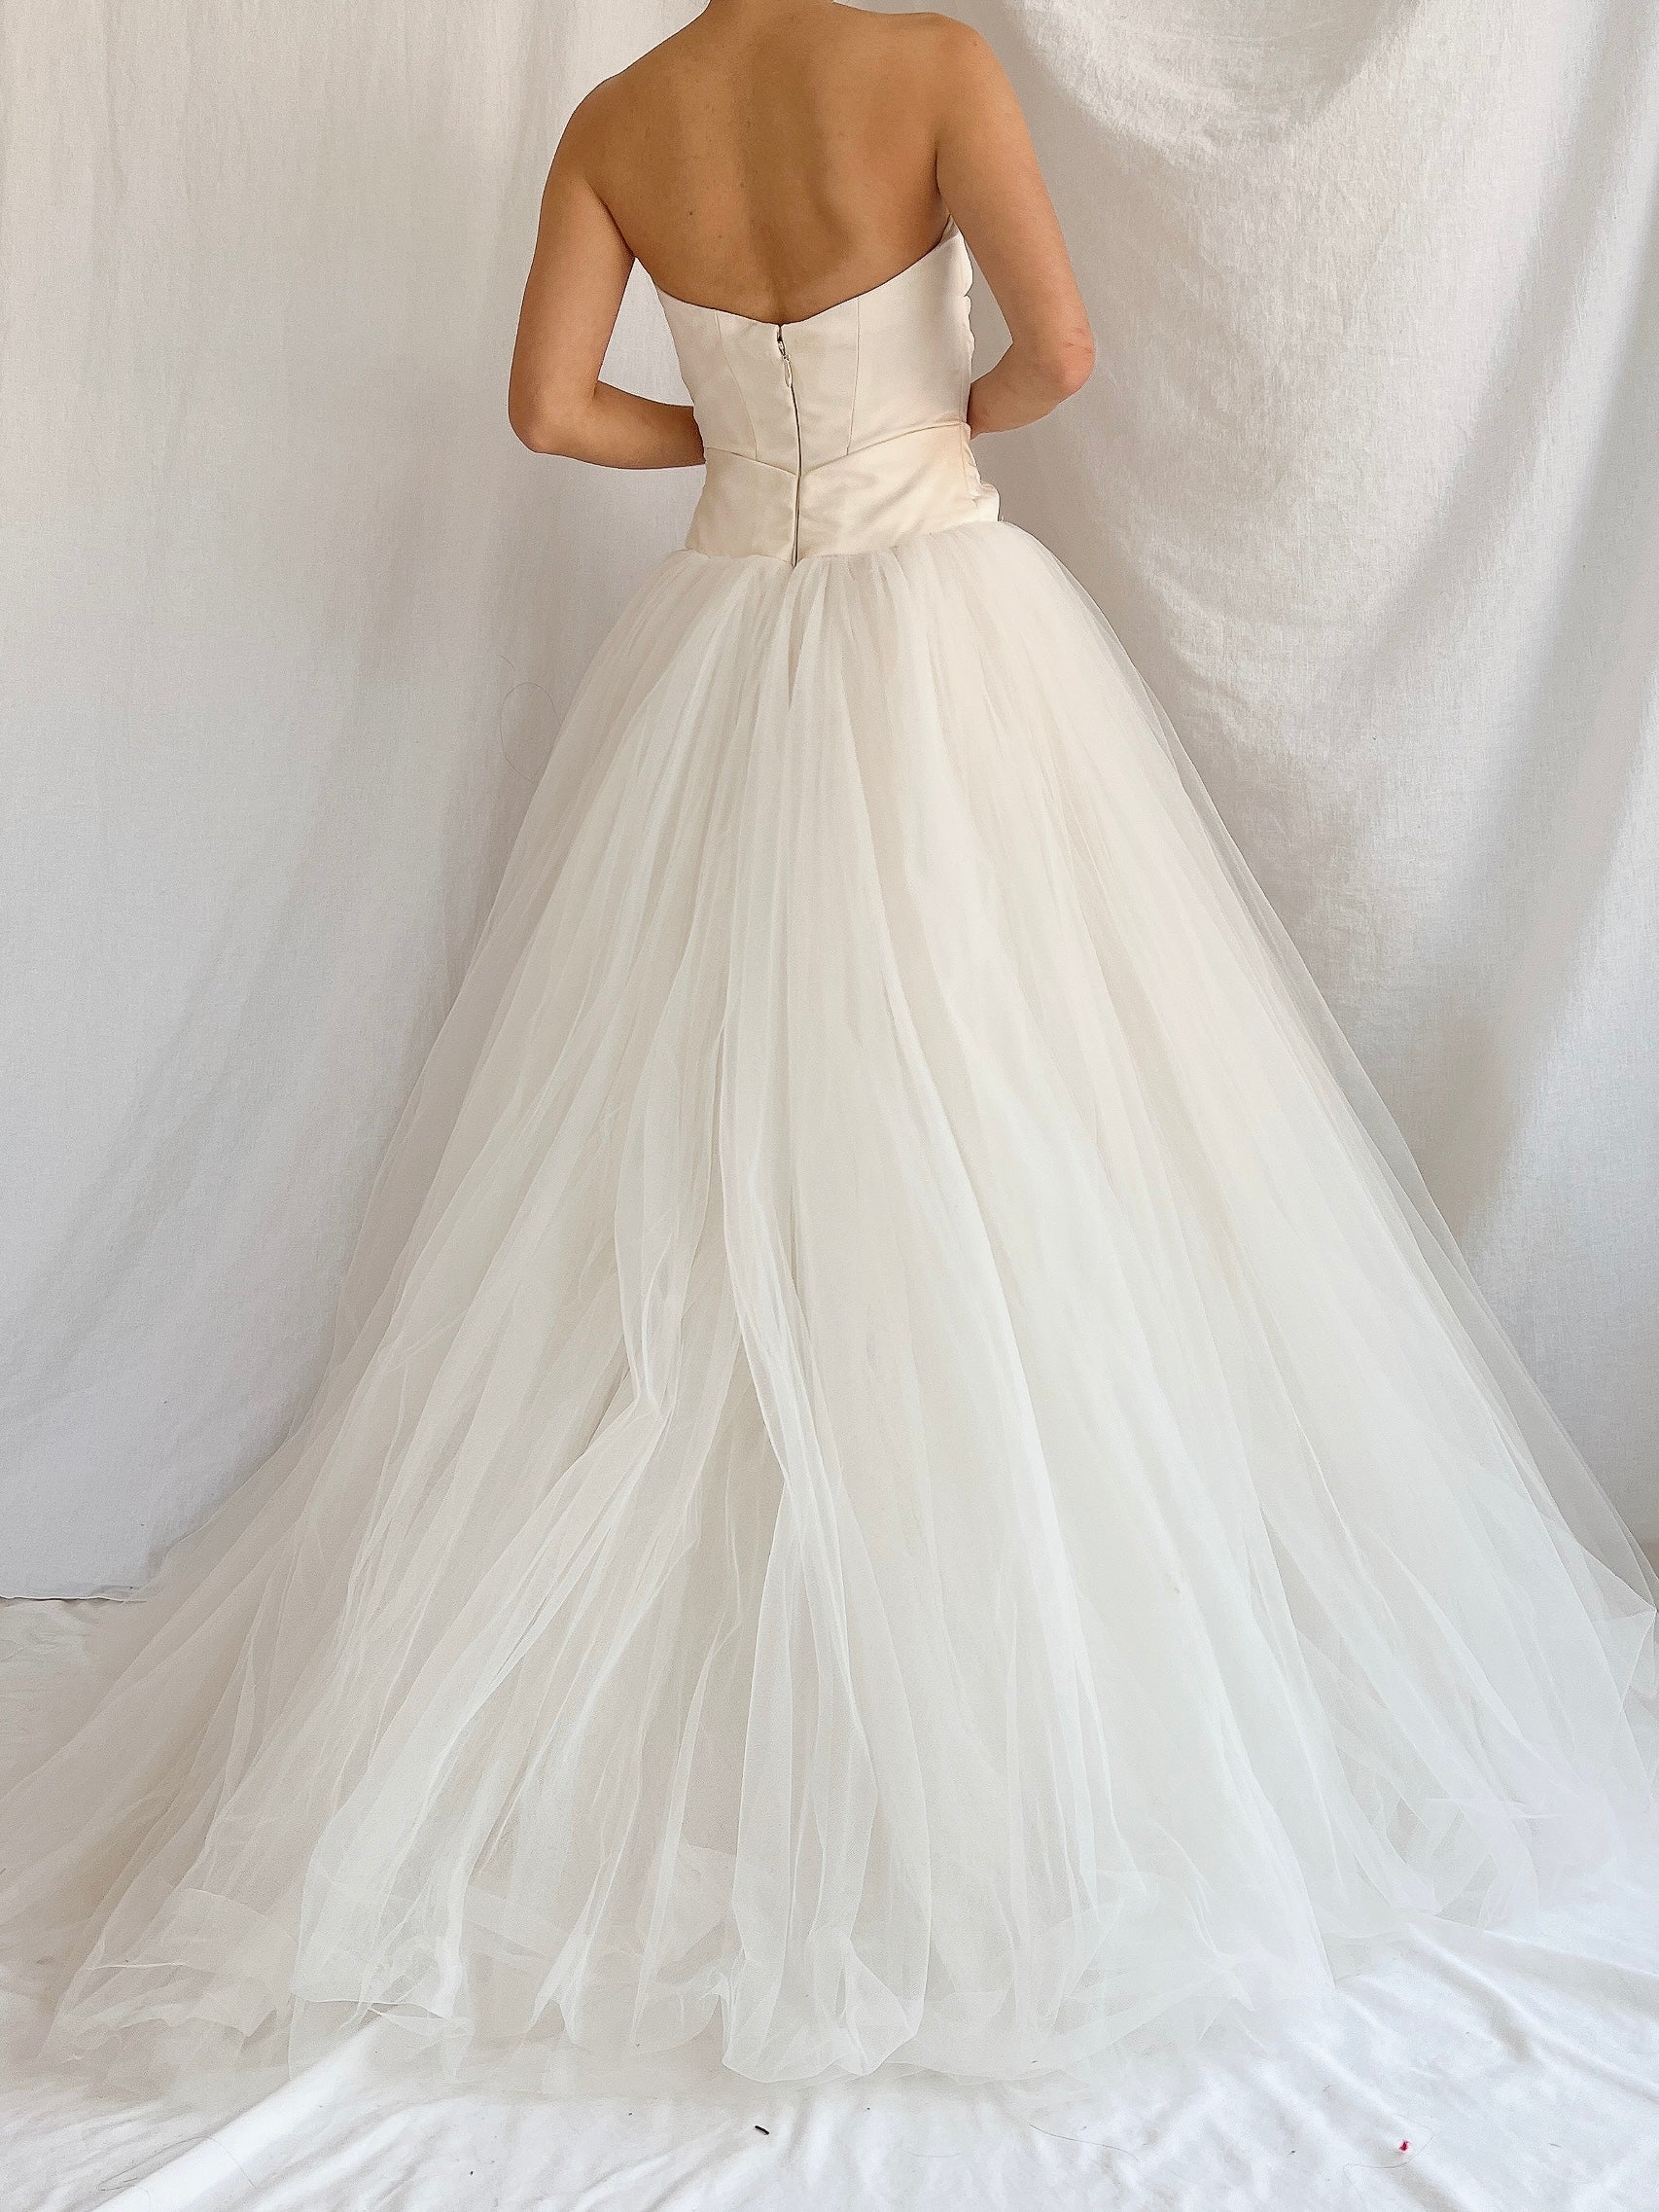 Vintage Tulle Gown - S/M 6/8